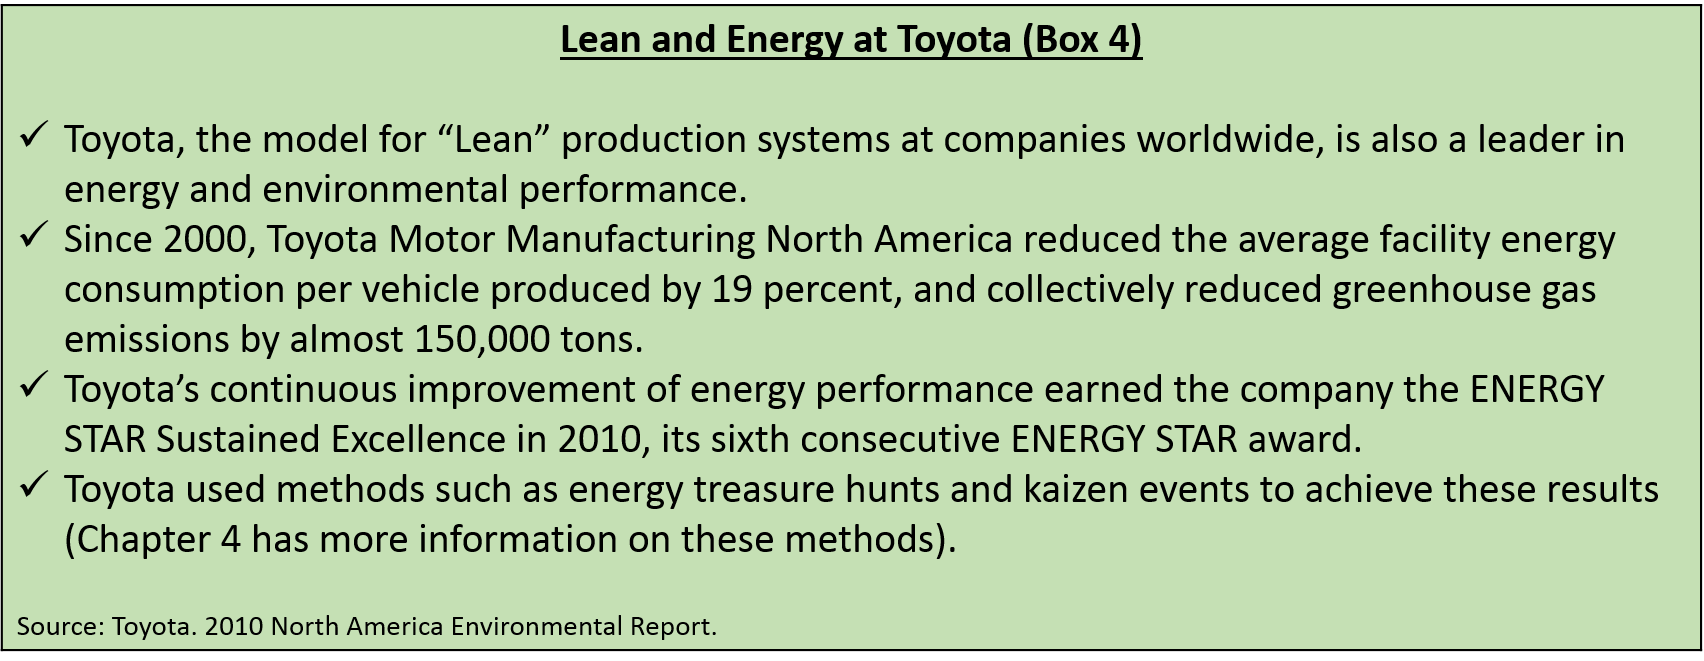 Lean and Energy at Toyota (Box 4) 